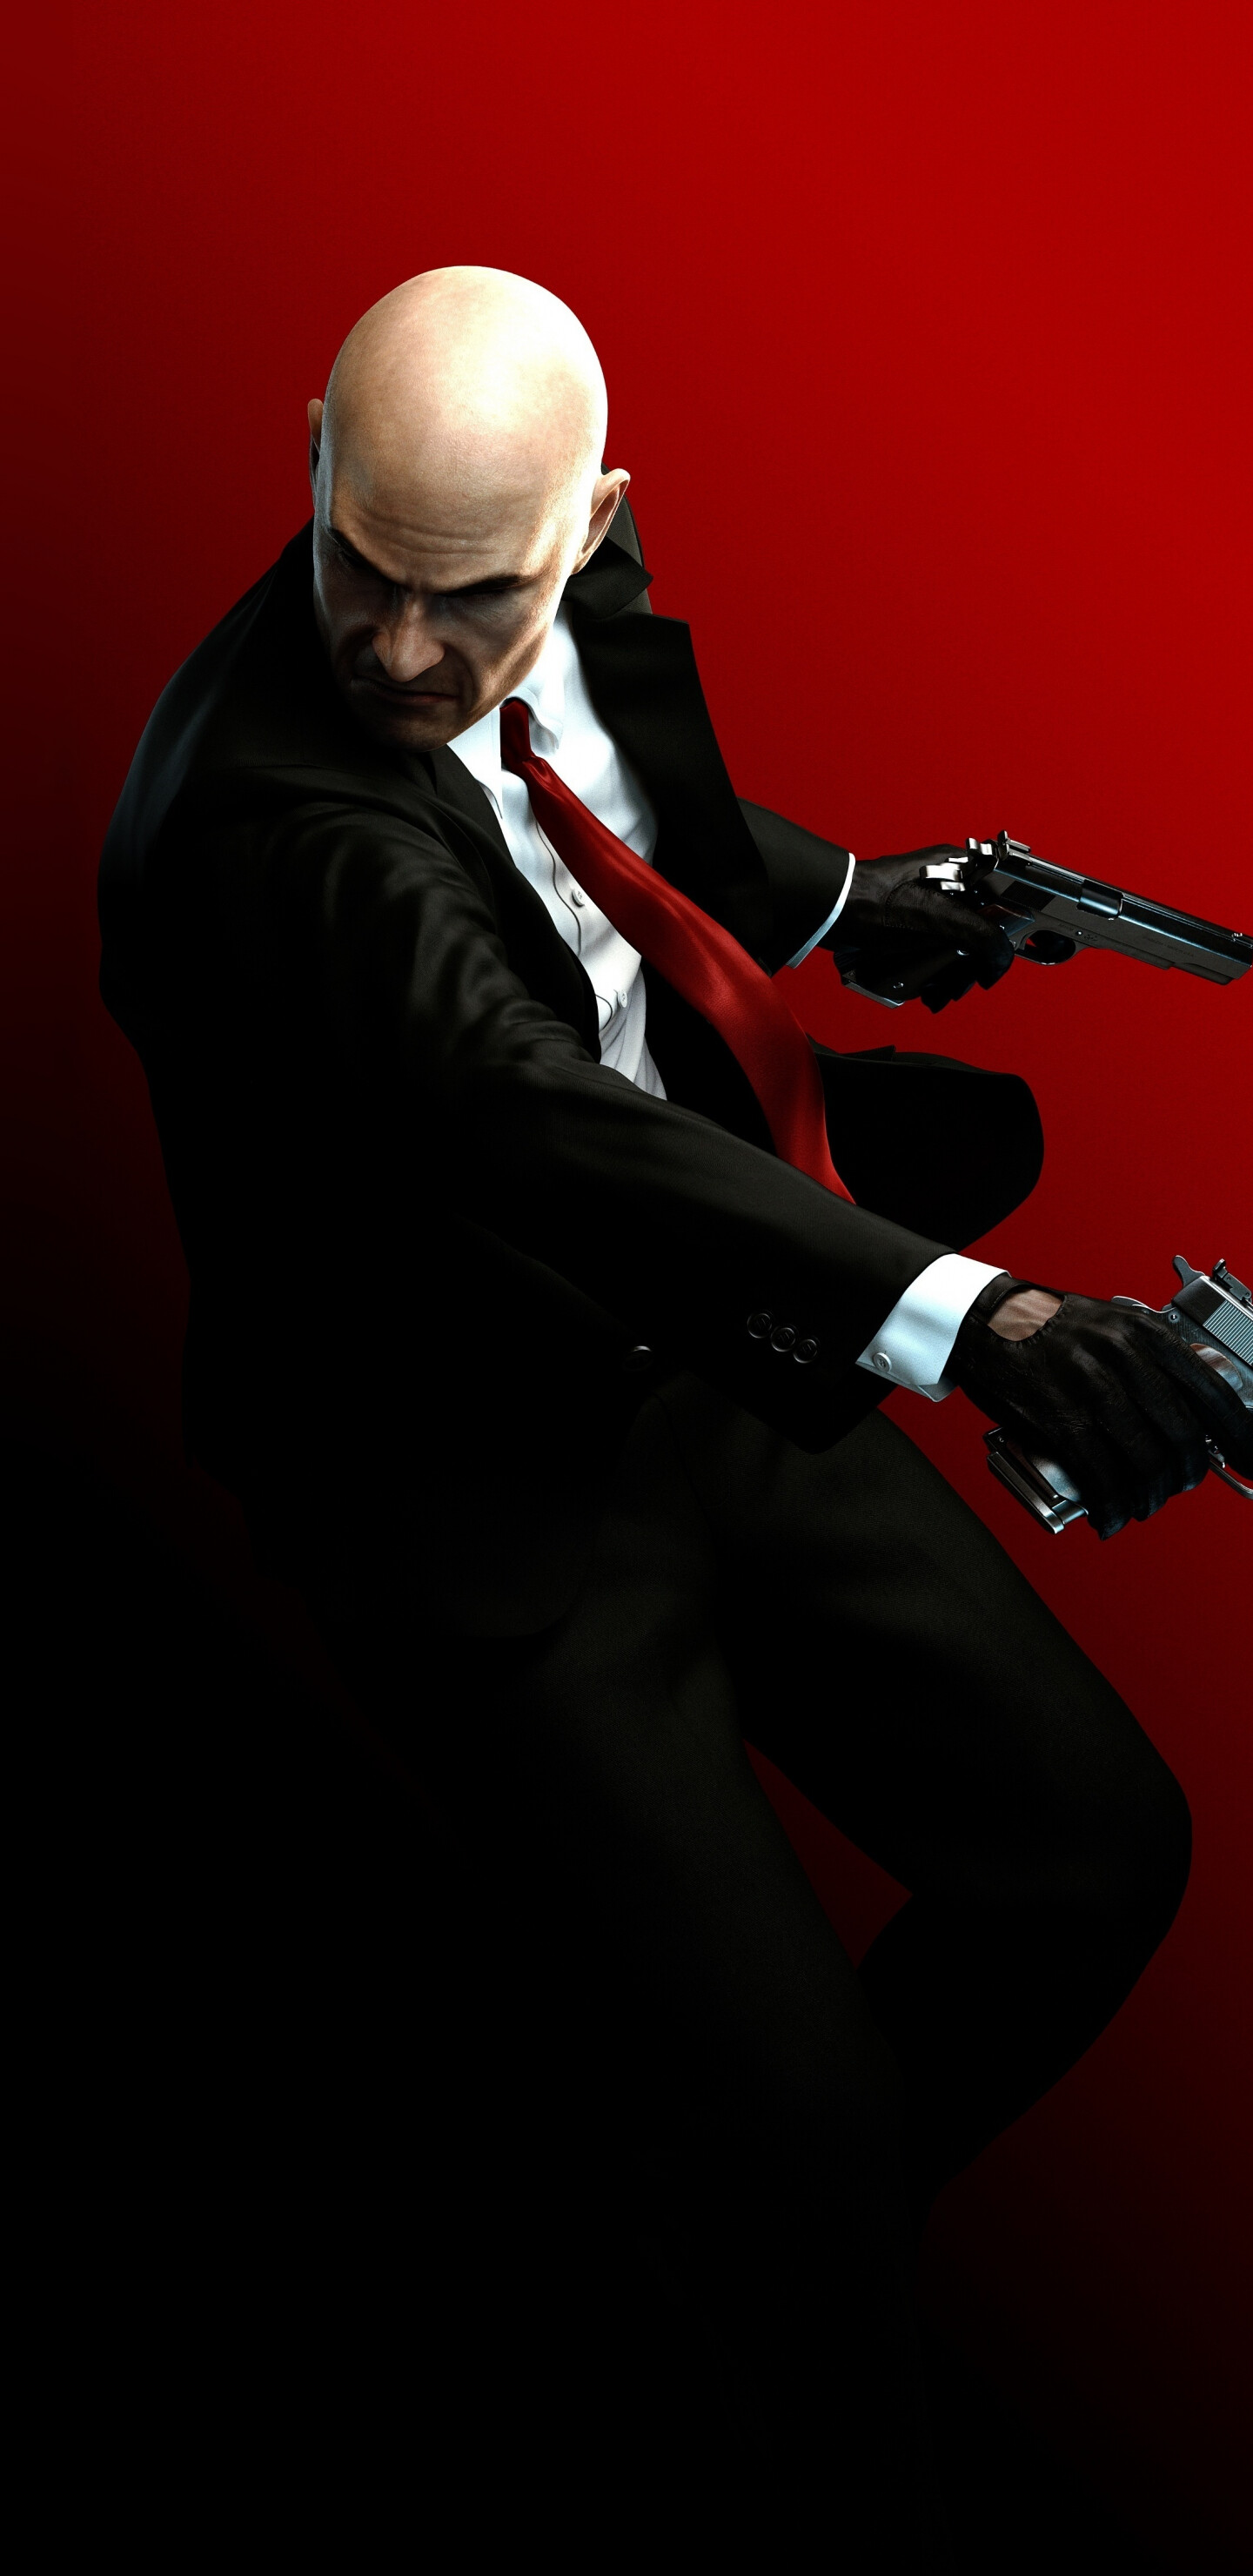 Hitman (Game): Agent 47, Silent Assassin, Developed by IO Interactive and published by Eidos Interactive, 2002. 1440x2960 HD Wallpaper.